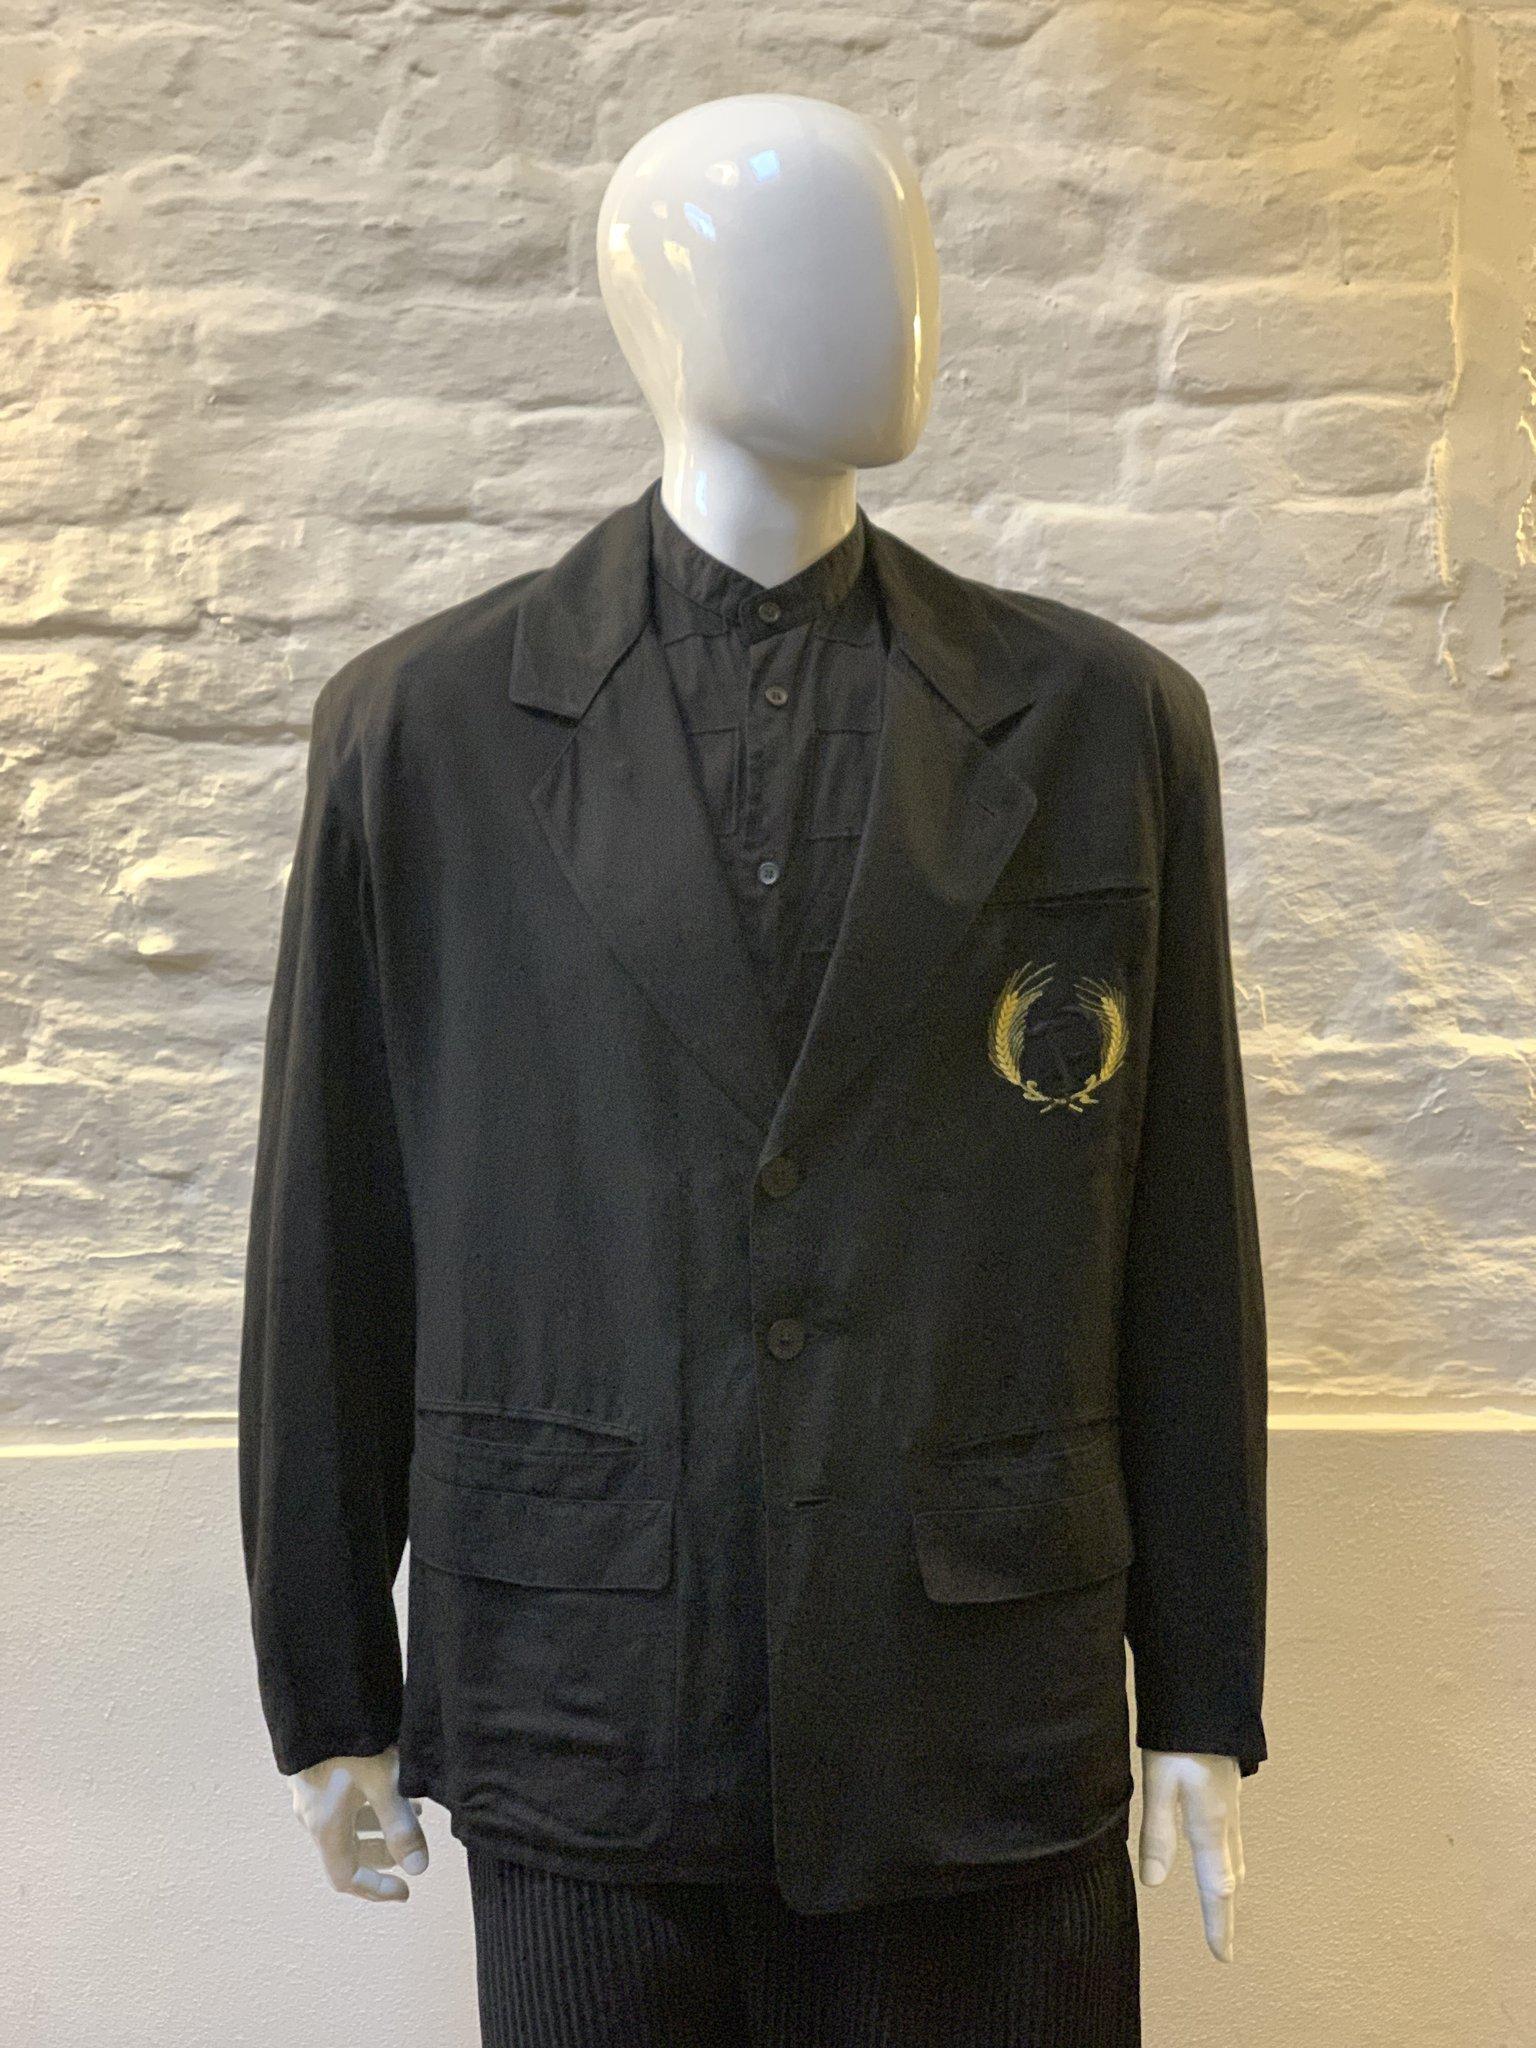 Calugi E Giannelli 80s Jacket with Motif made in Italy from cotton. 

Since beginning in 1982, Calugi e Giannelli has invented and reinvented clothing—menswear in particular—as if it were conceptual art. Arguably, Calugi e Giannelli clothing is an